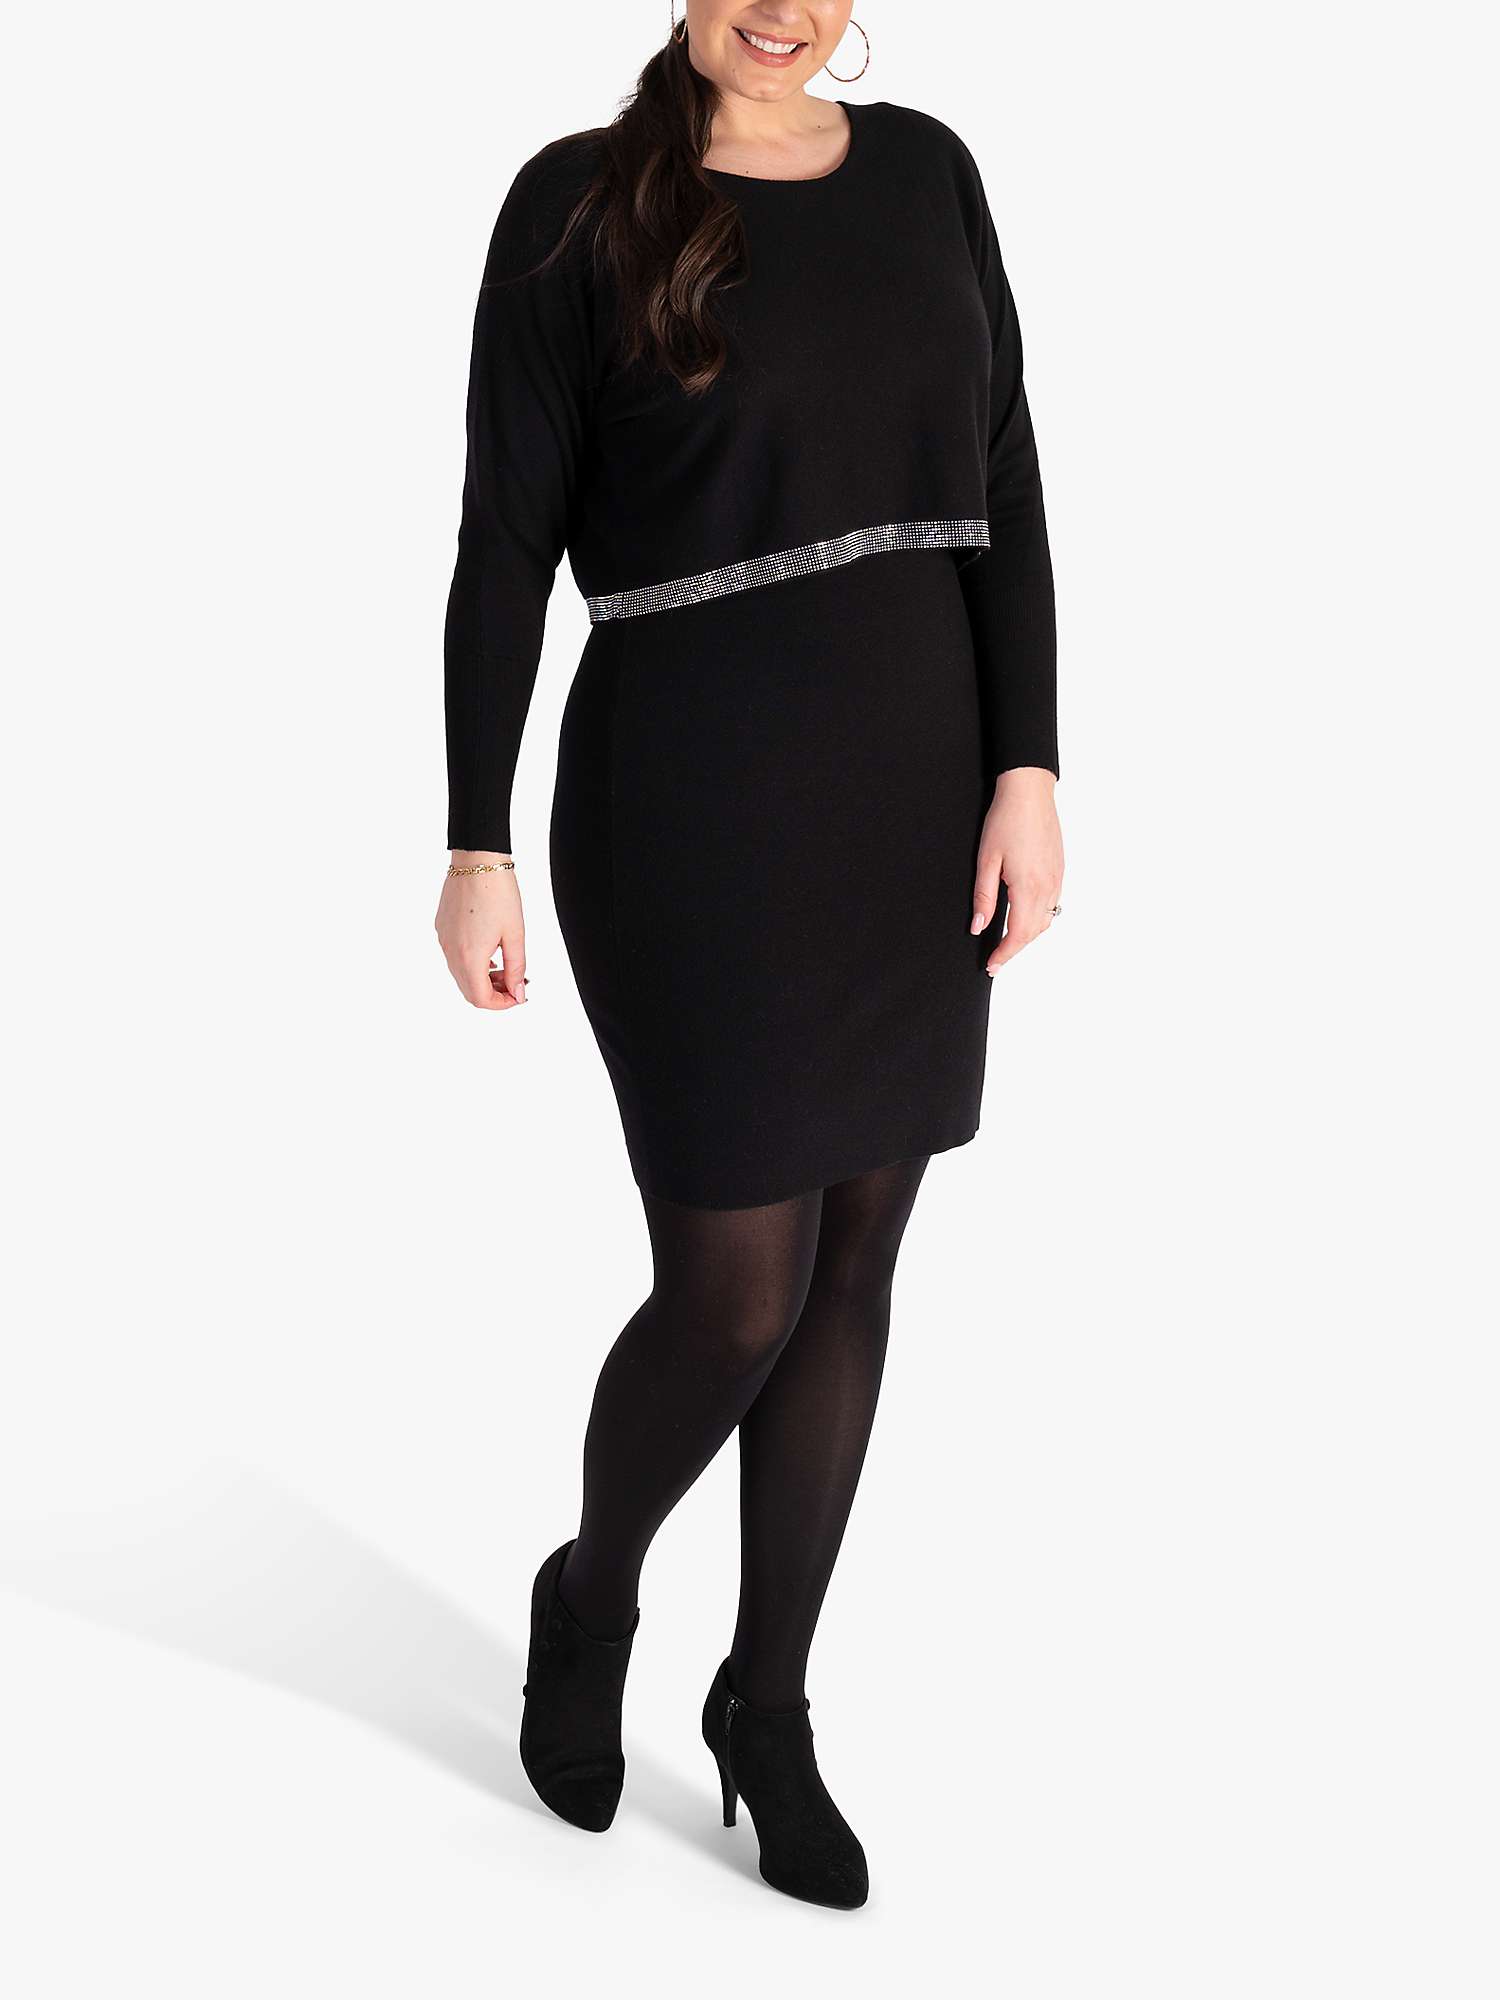 Buy chesca Diamante Waist Knitted Dress, Black Online at johnlewis.com